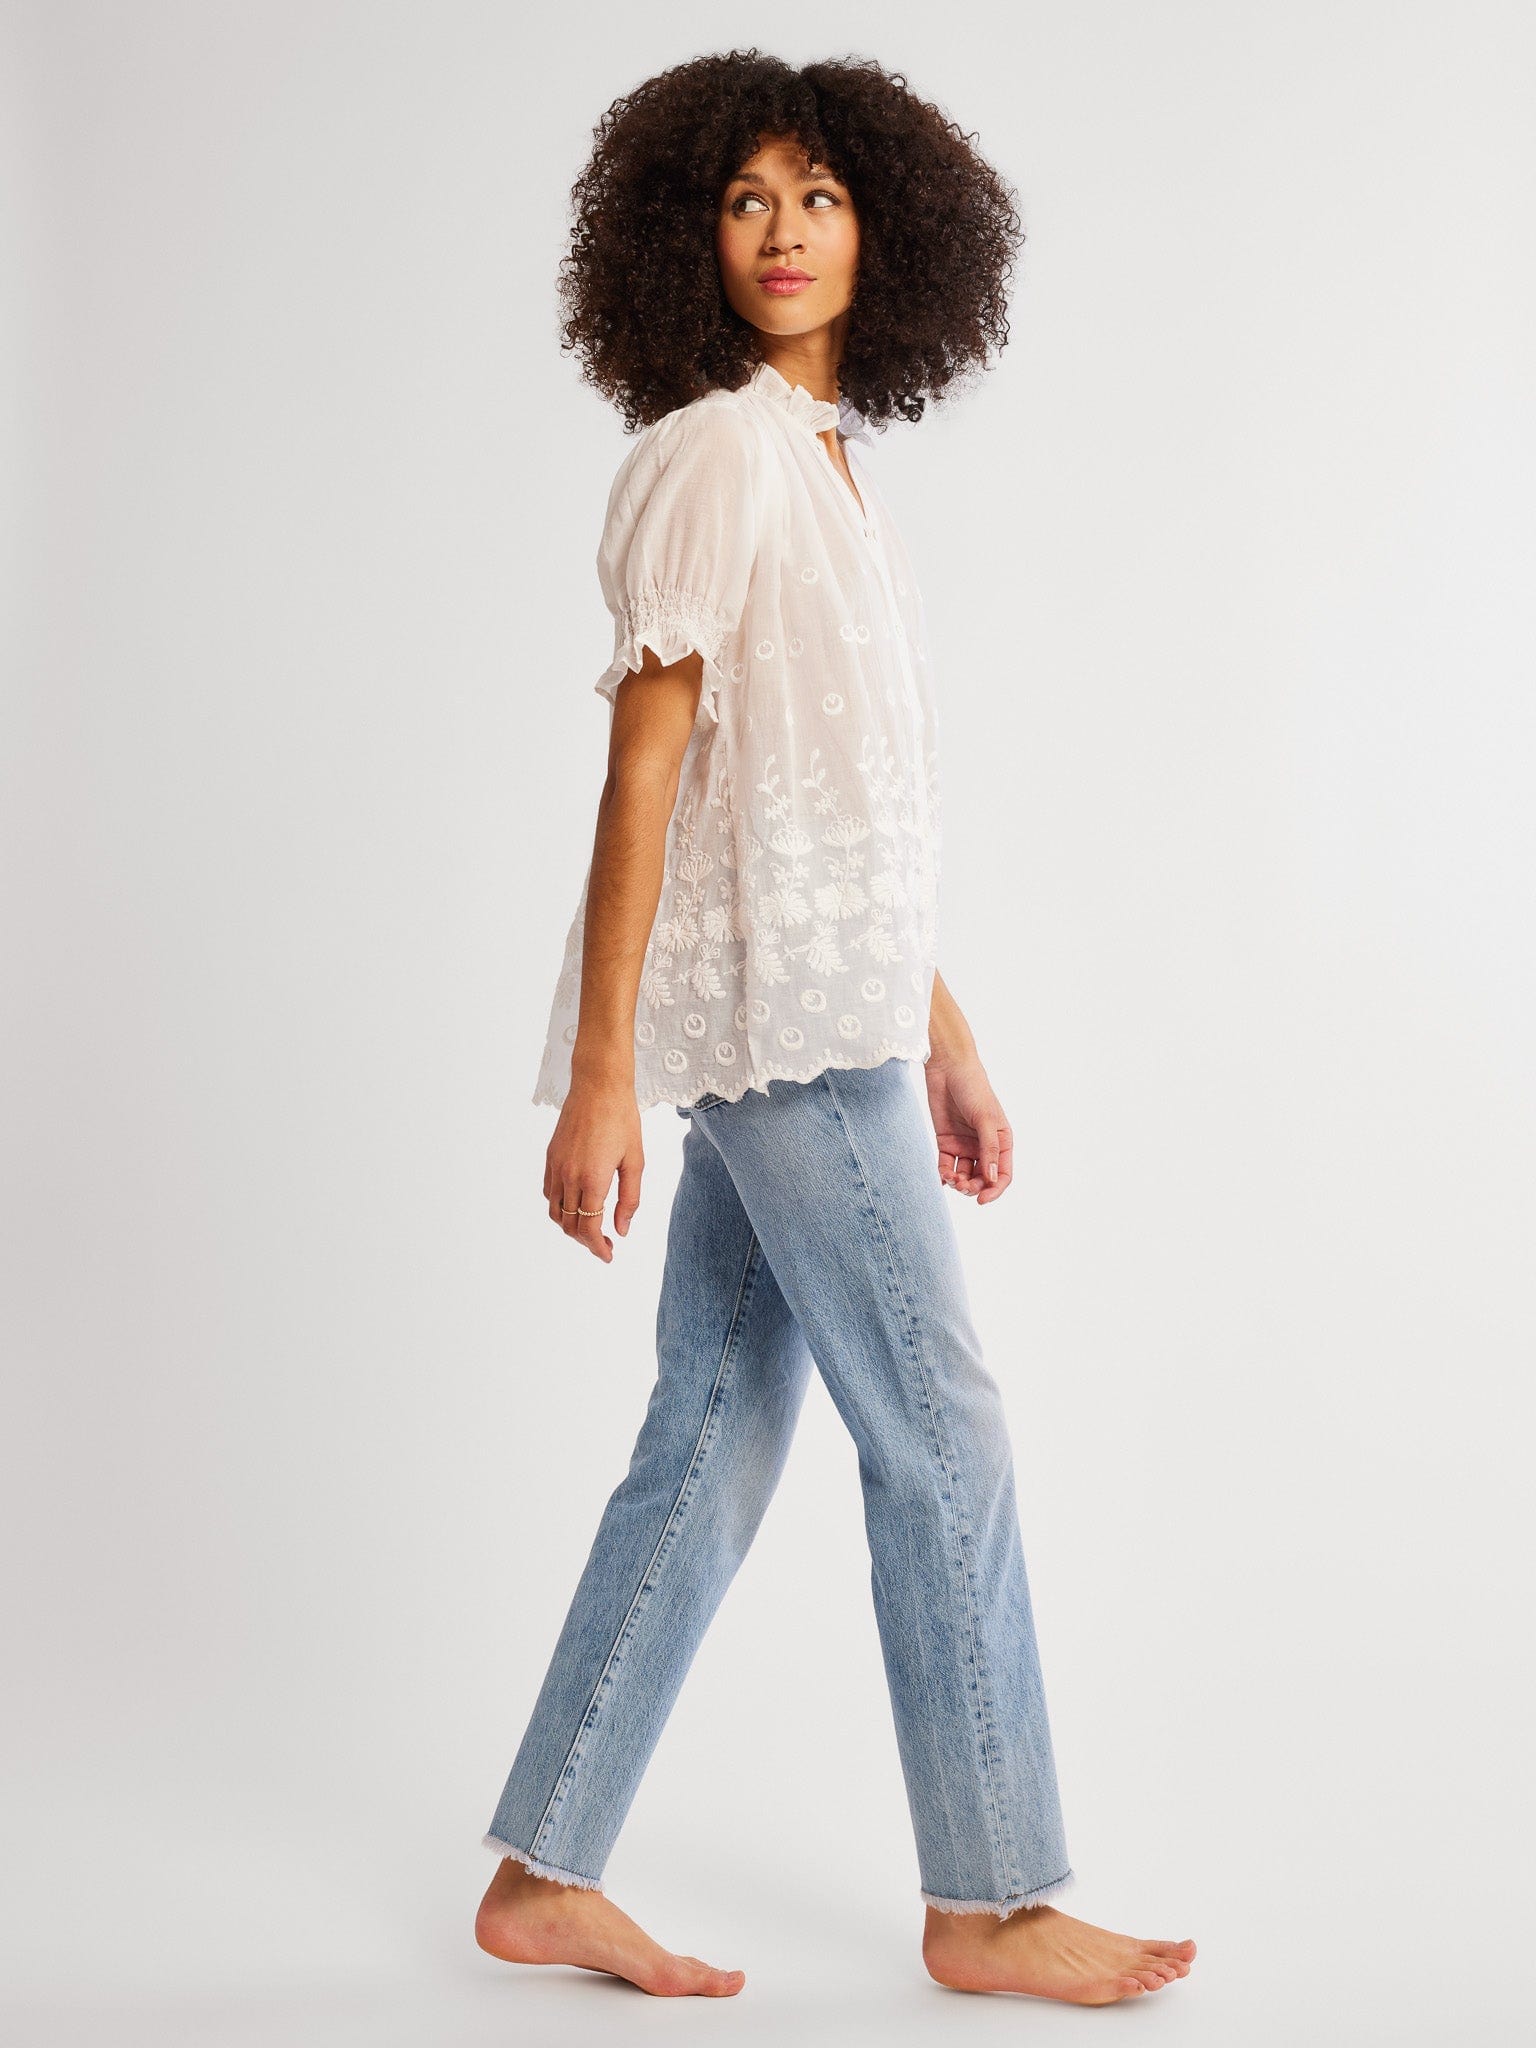 MILLE Clothing Marnie Top in White Petal Embroidery